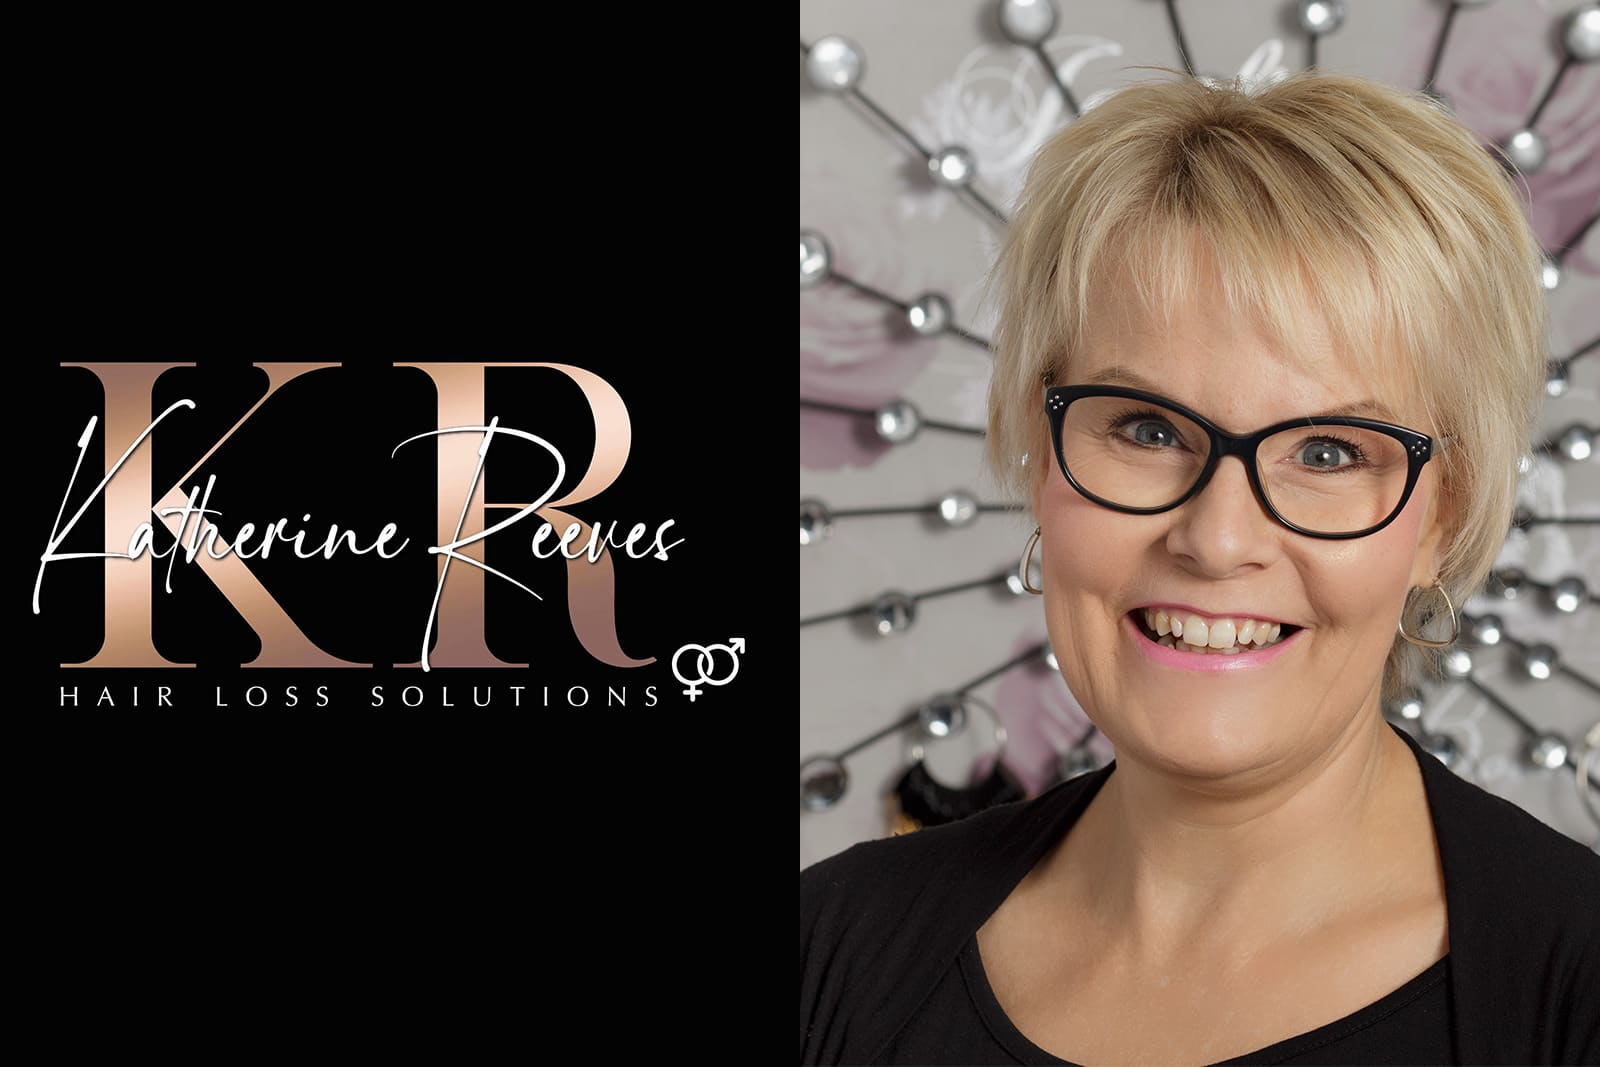 Portrait and logo of Katherine Reeves Hair Loss solutions